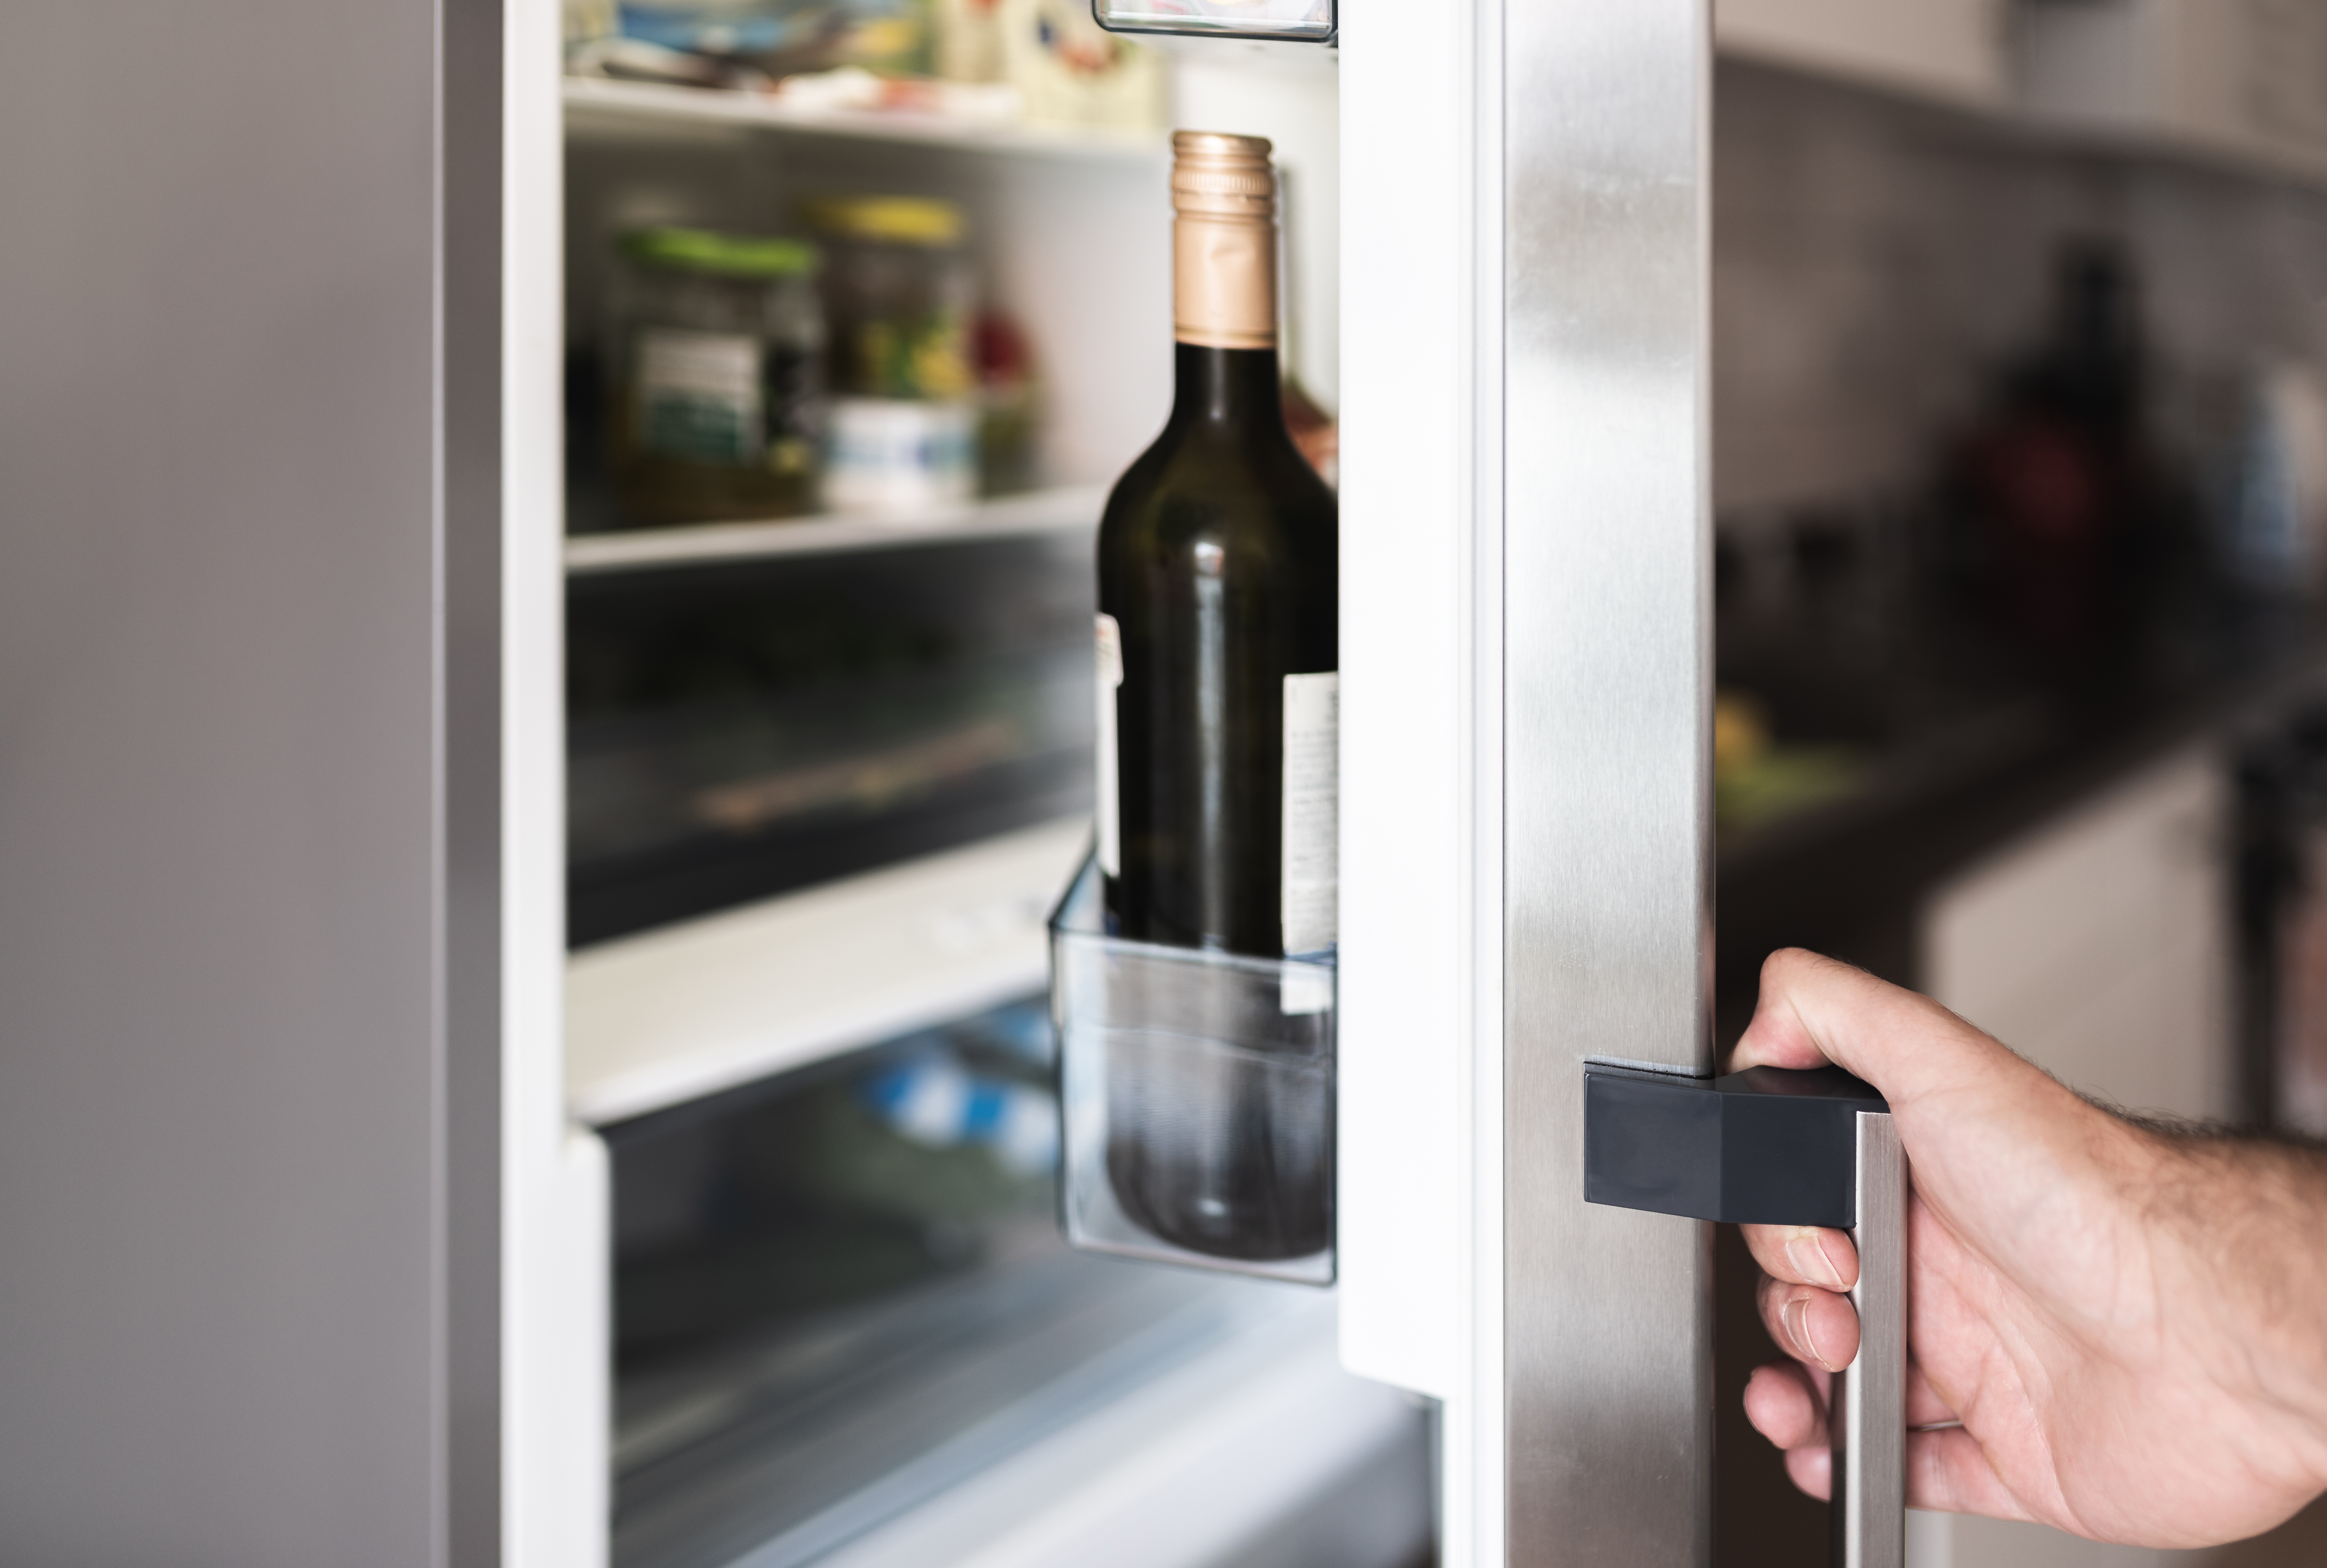 Sleek refrigerator door being opened by a white male hang, with a bottle of wine visible on the door shelf